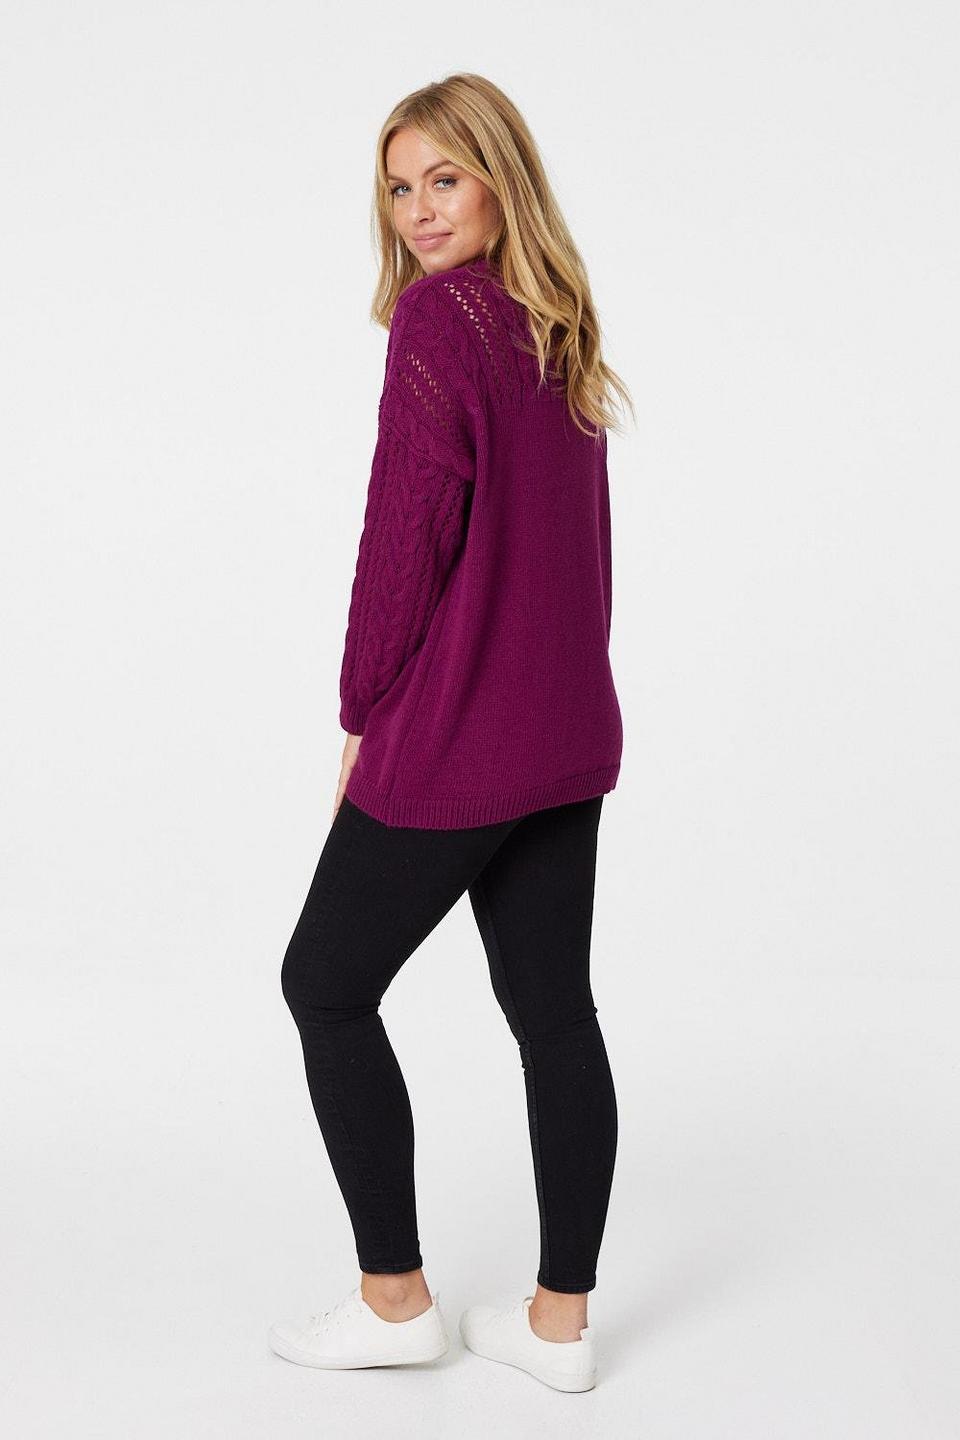 Jumpers & Cardigans | Cable Knit Slouchy Knit Jumper | Izabel London